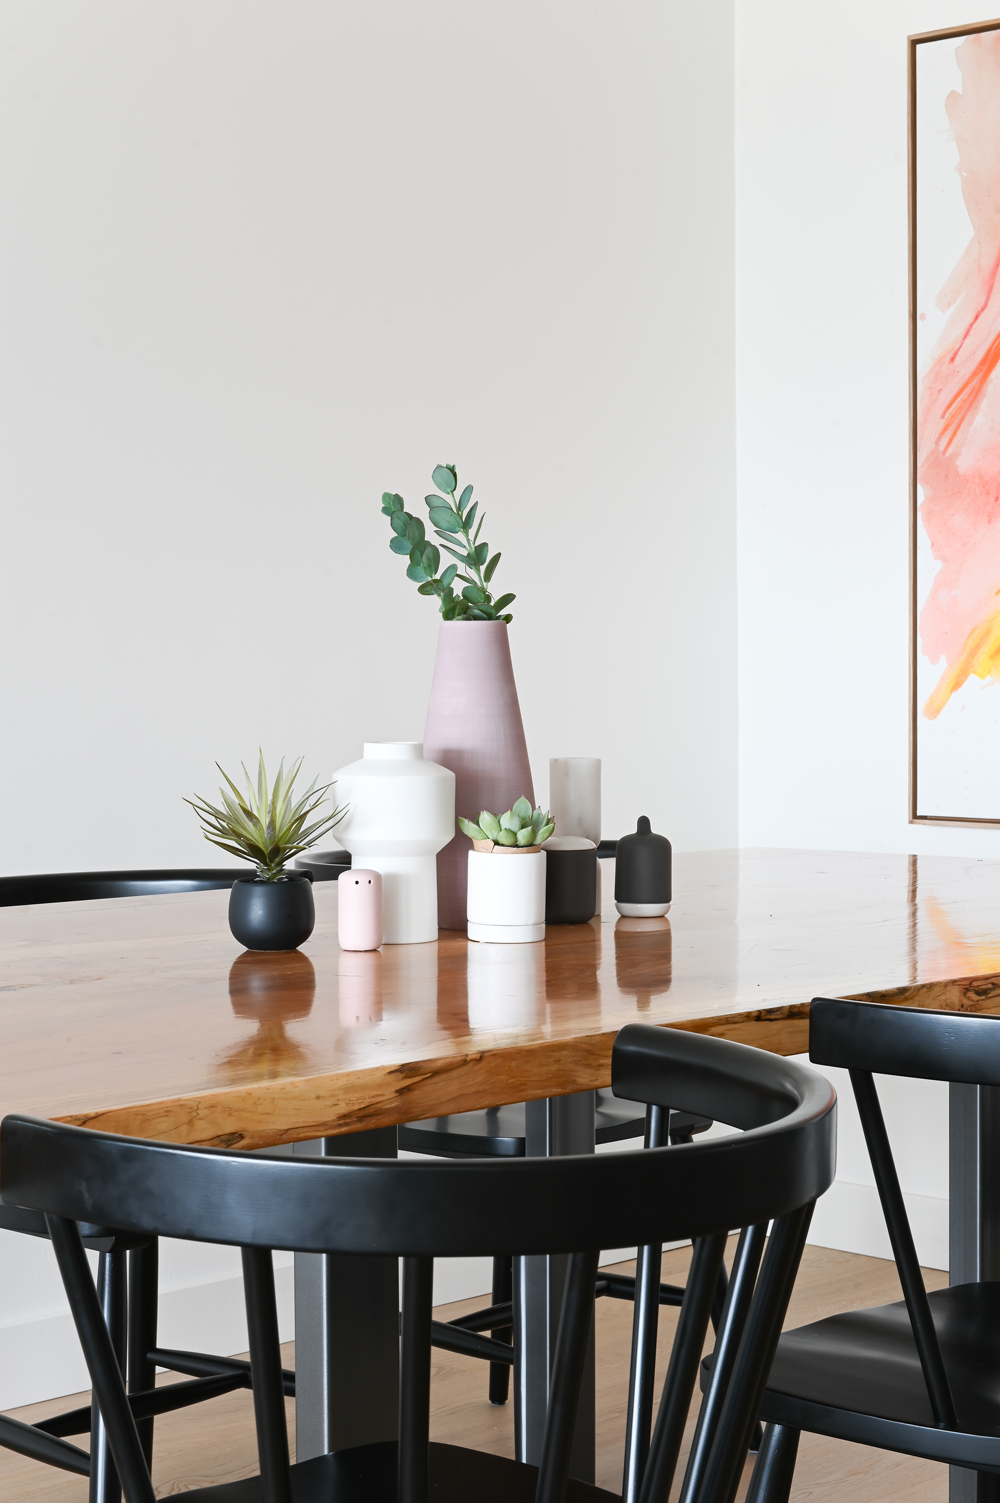 wood top dining table with pink white and black vessels and plants, black chairs